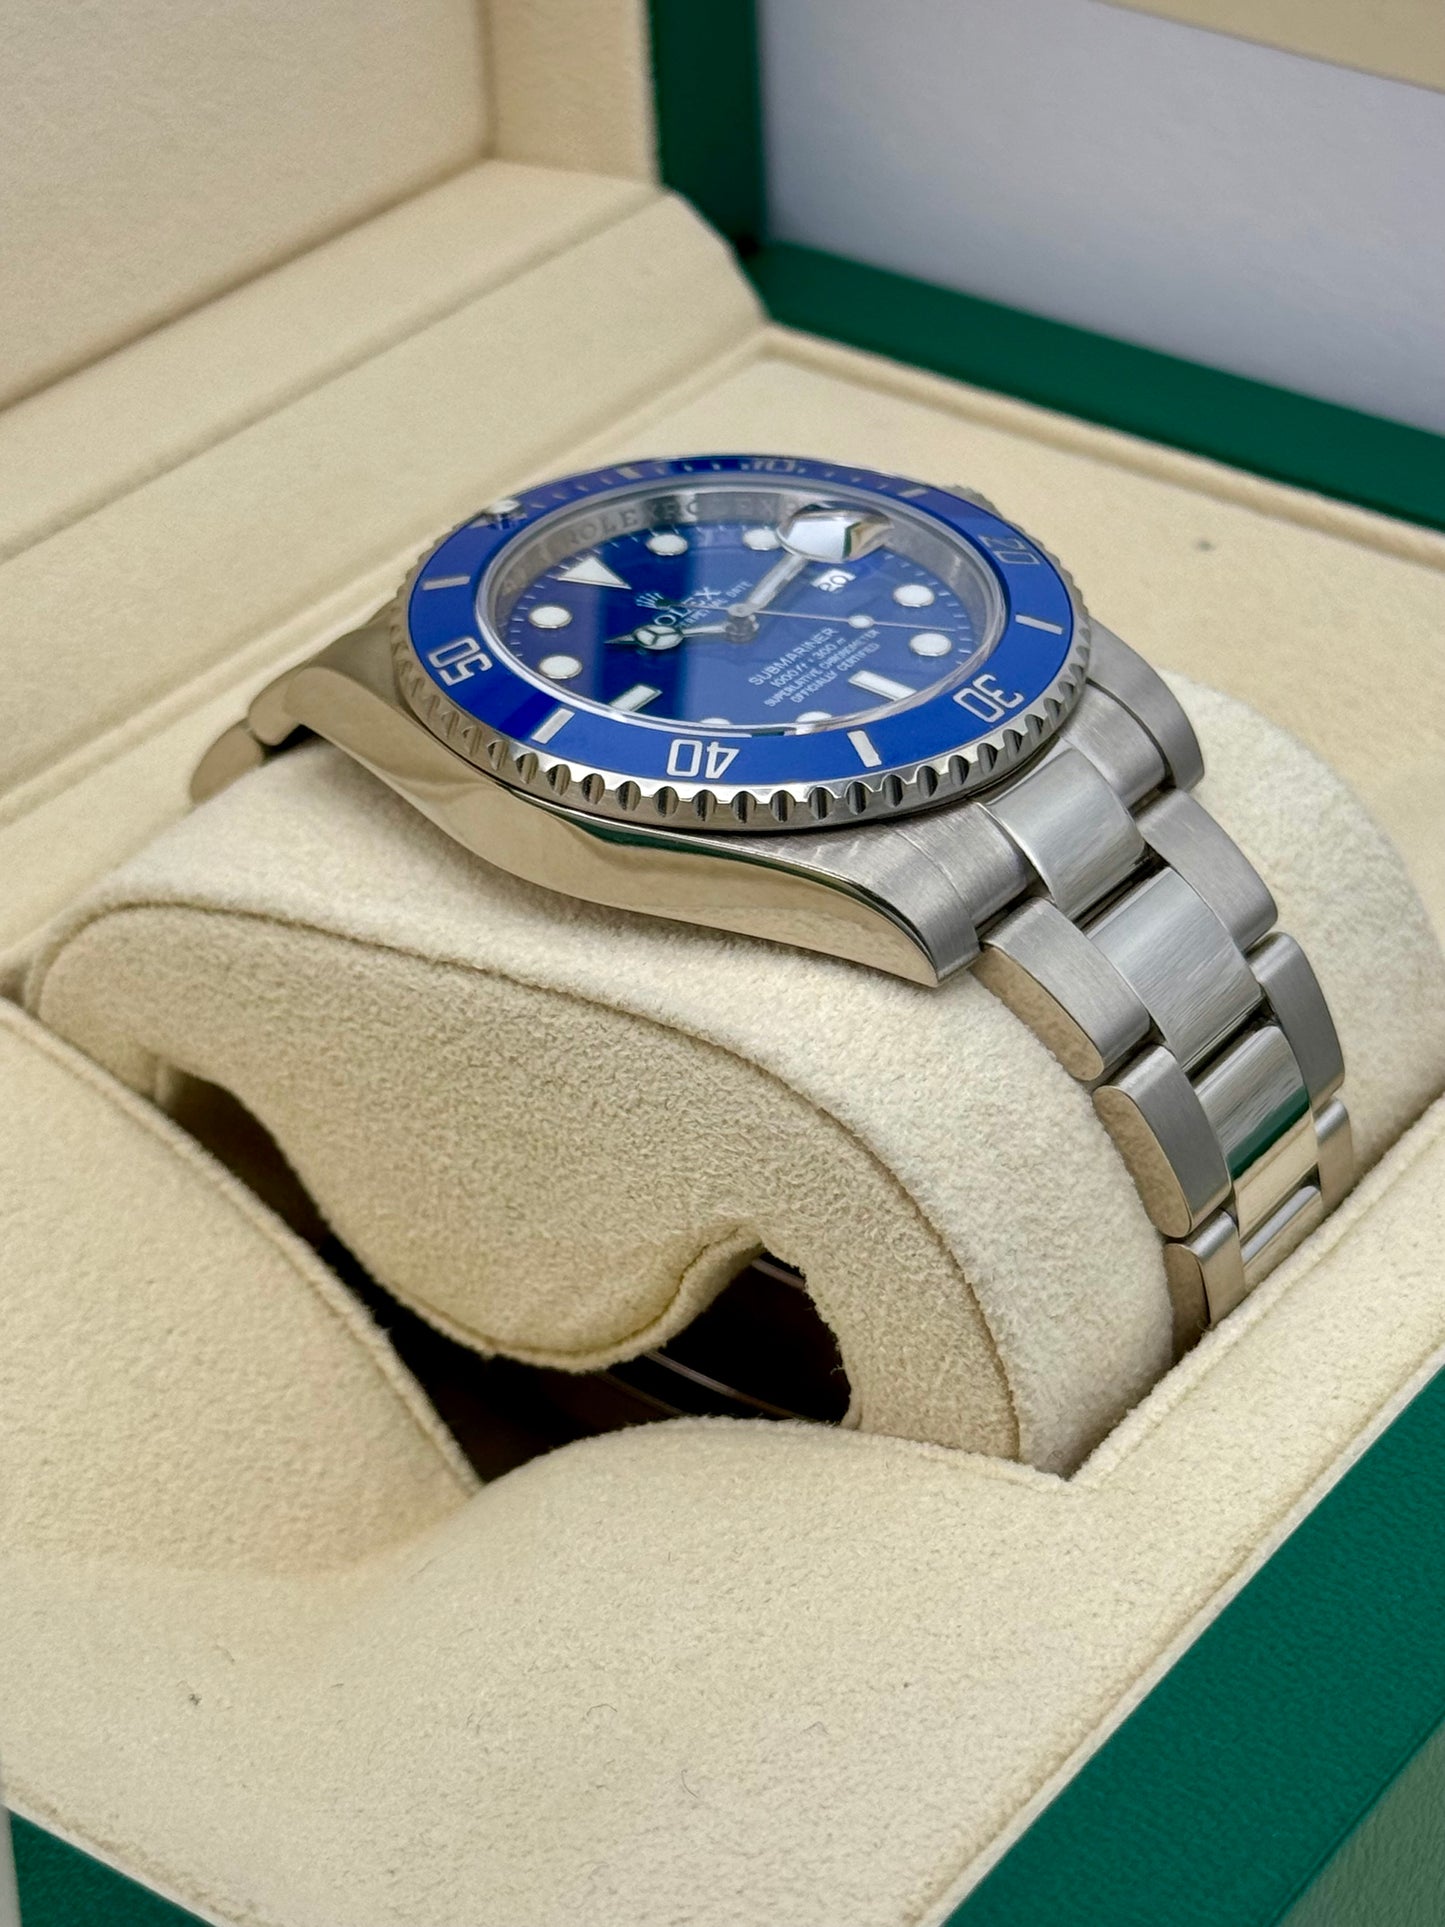 2012 Rolex Submariner Date "Smurf" 40mm 116619 White Gold Blue Dial - MyWatchLLC